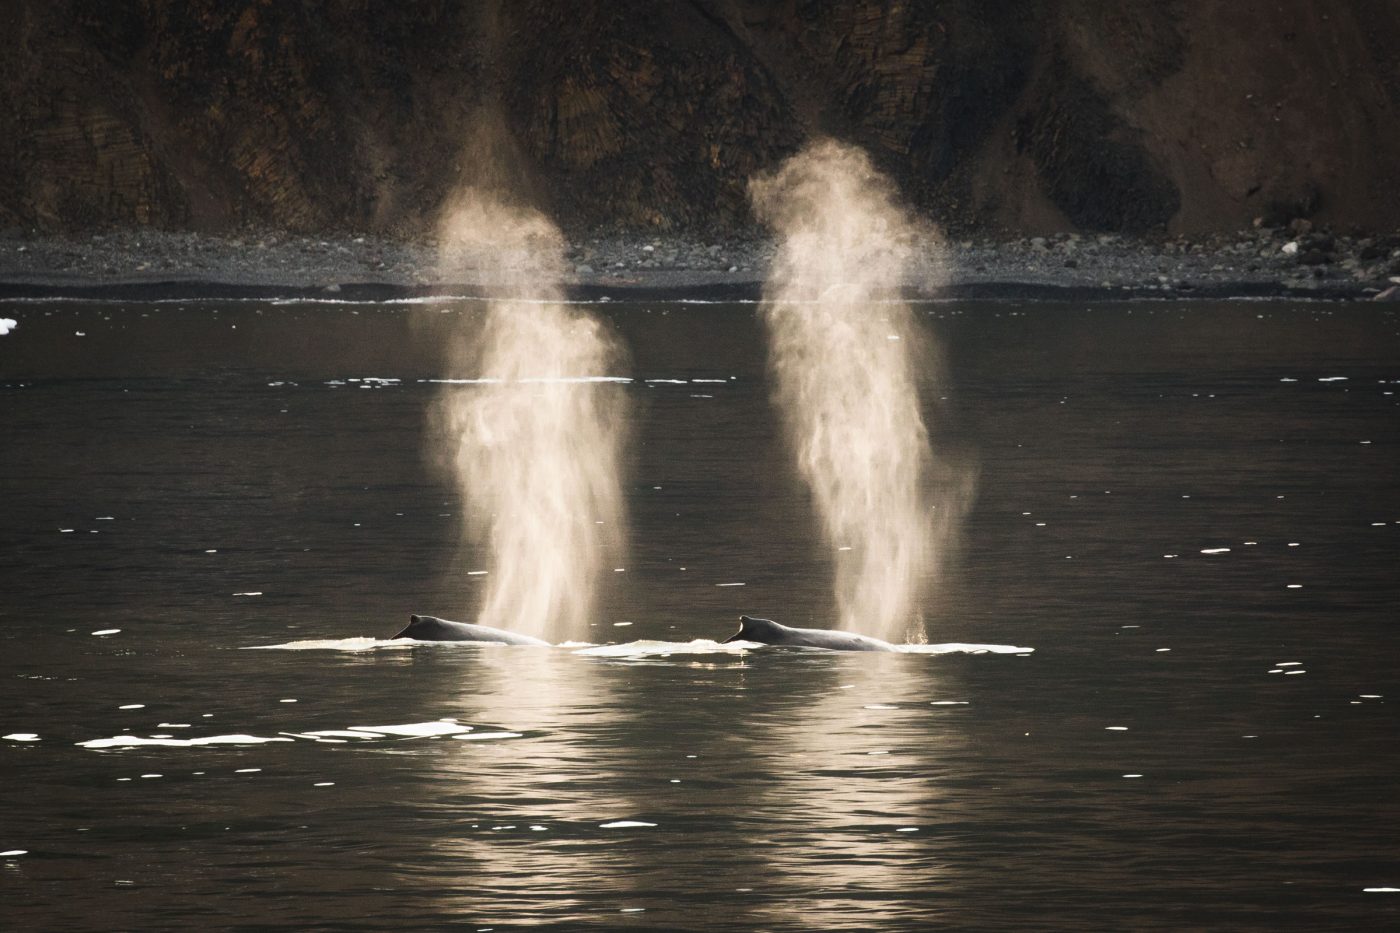 Two fin whales in Greenlandic waters. Photo by Mads Pihl